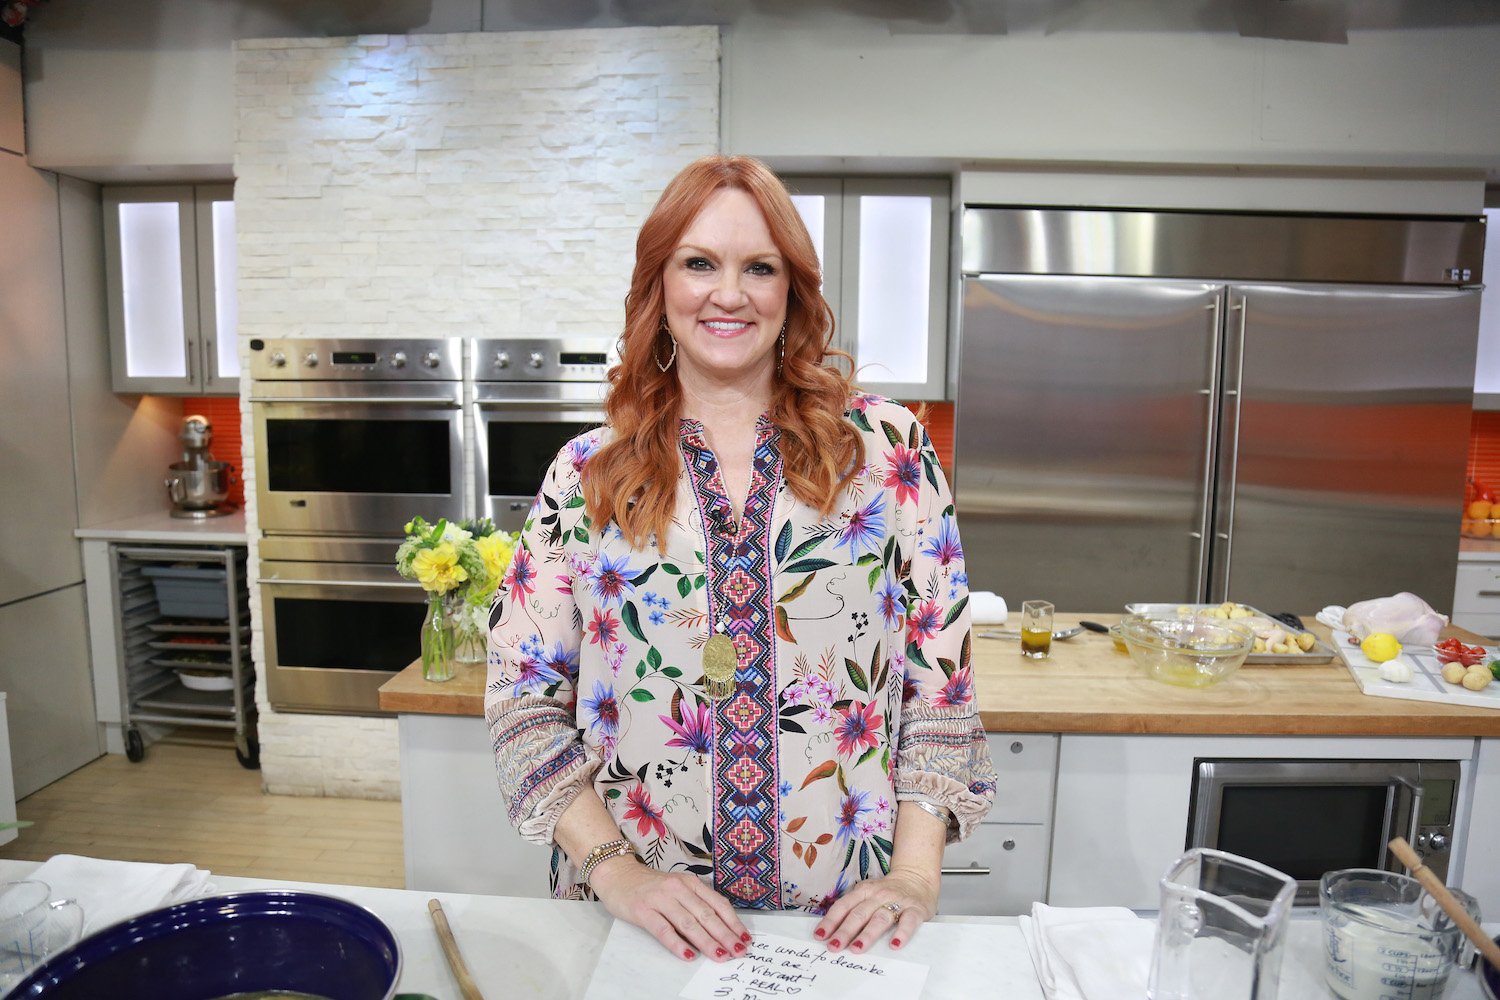 Ree Drummond Said She's 'Obsessed' With Her Air Fryer: 'The